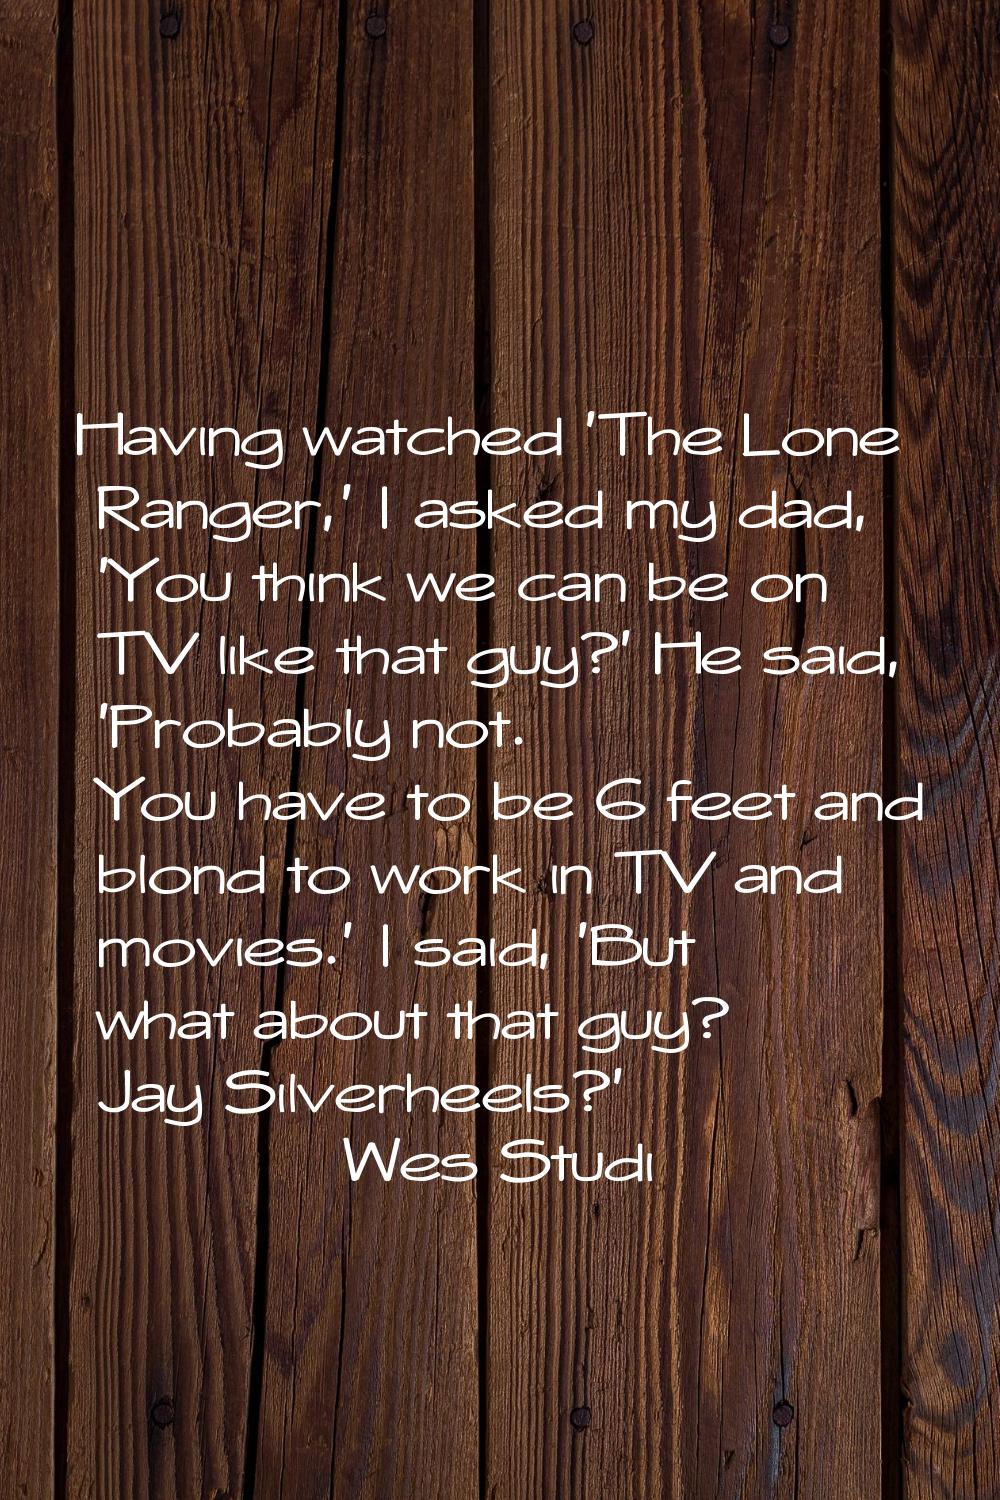 Having watched 'The Lone Ranger,' I asked my dad, 'You think we can be on TV like that guy?' He sai